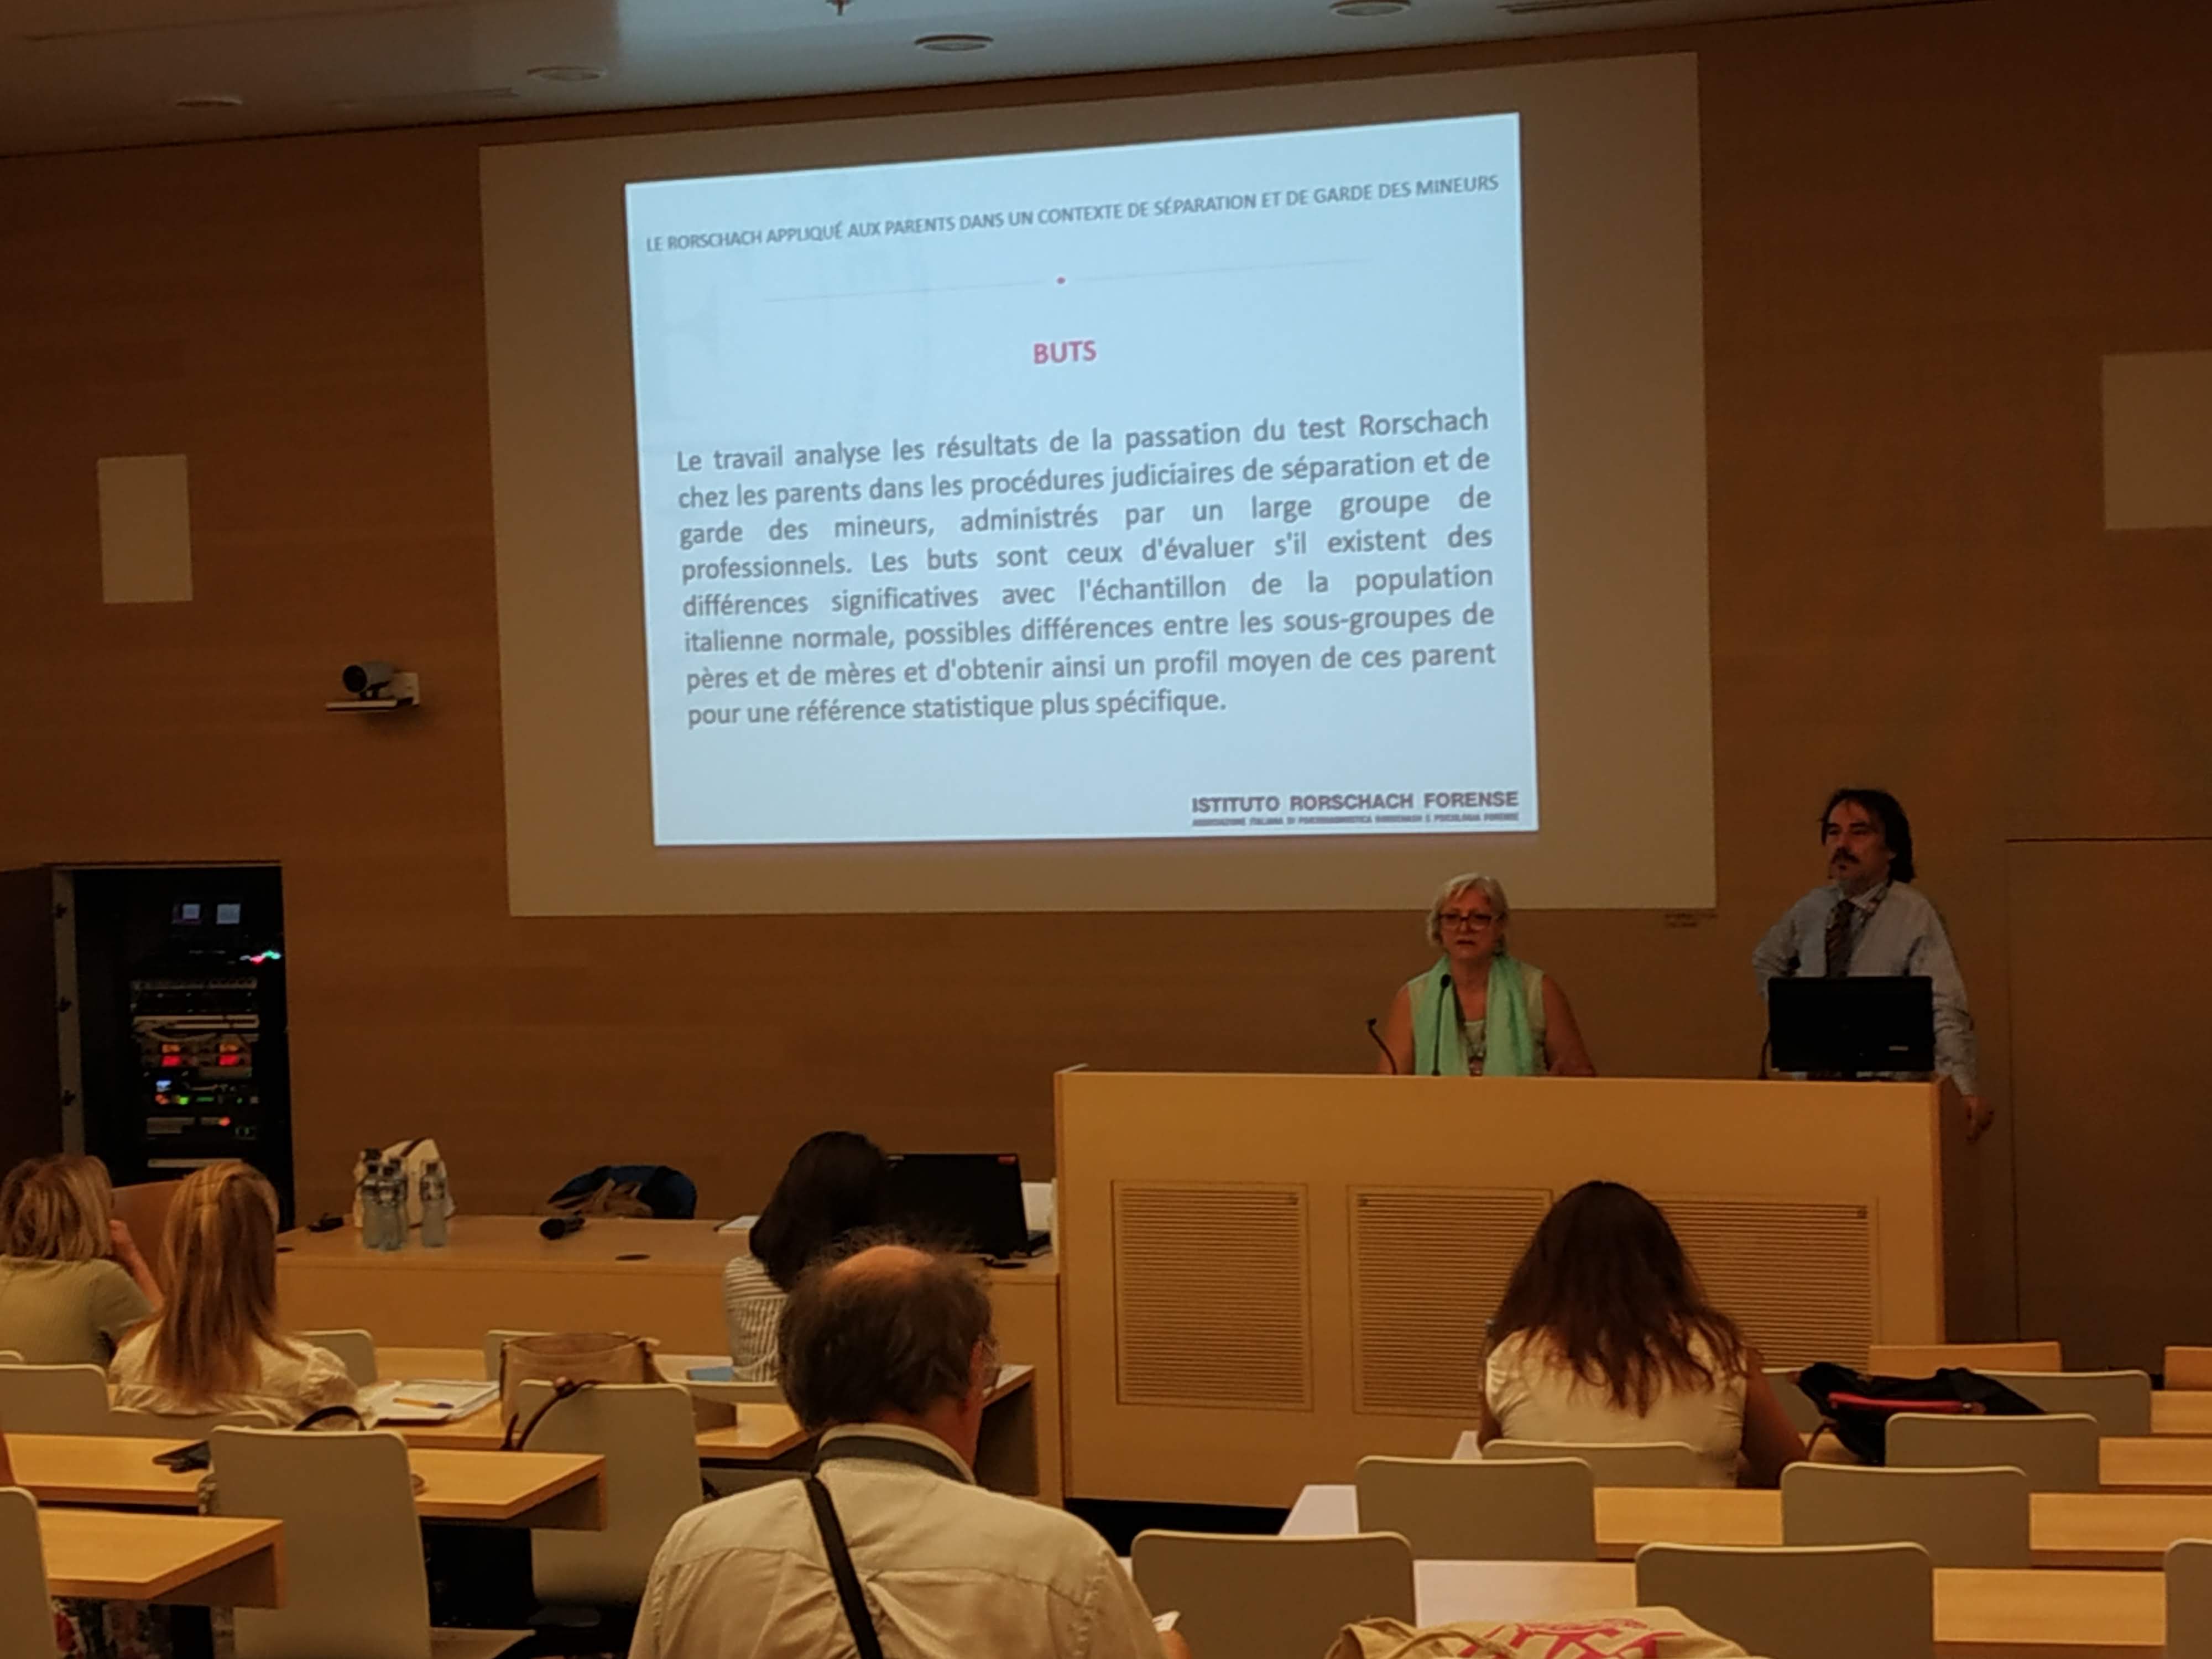 Oral presentation: The Rorschach aministred to parents in separation and child custody cases